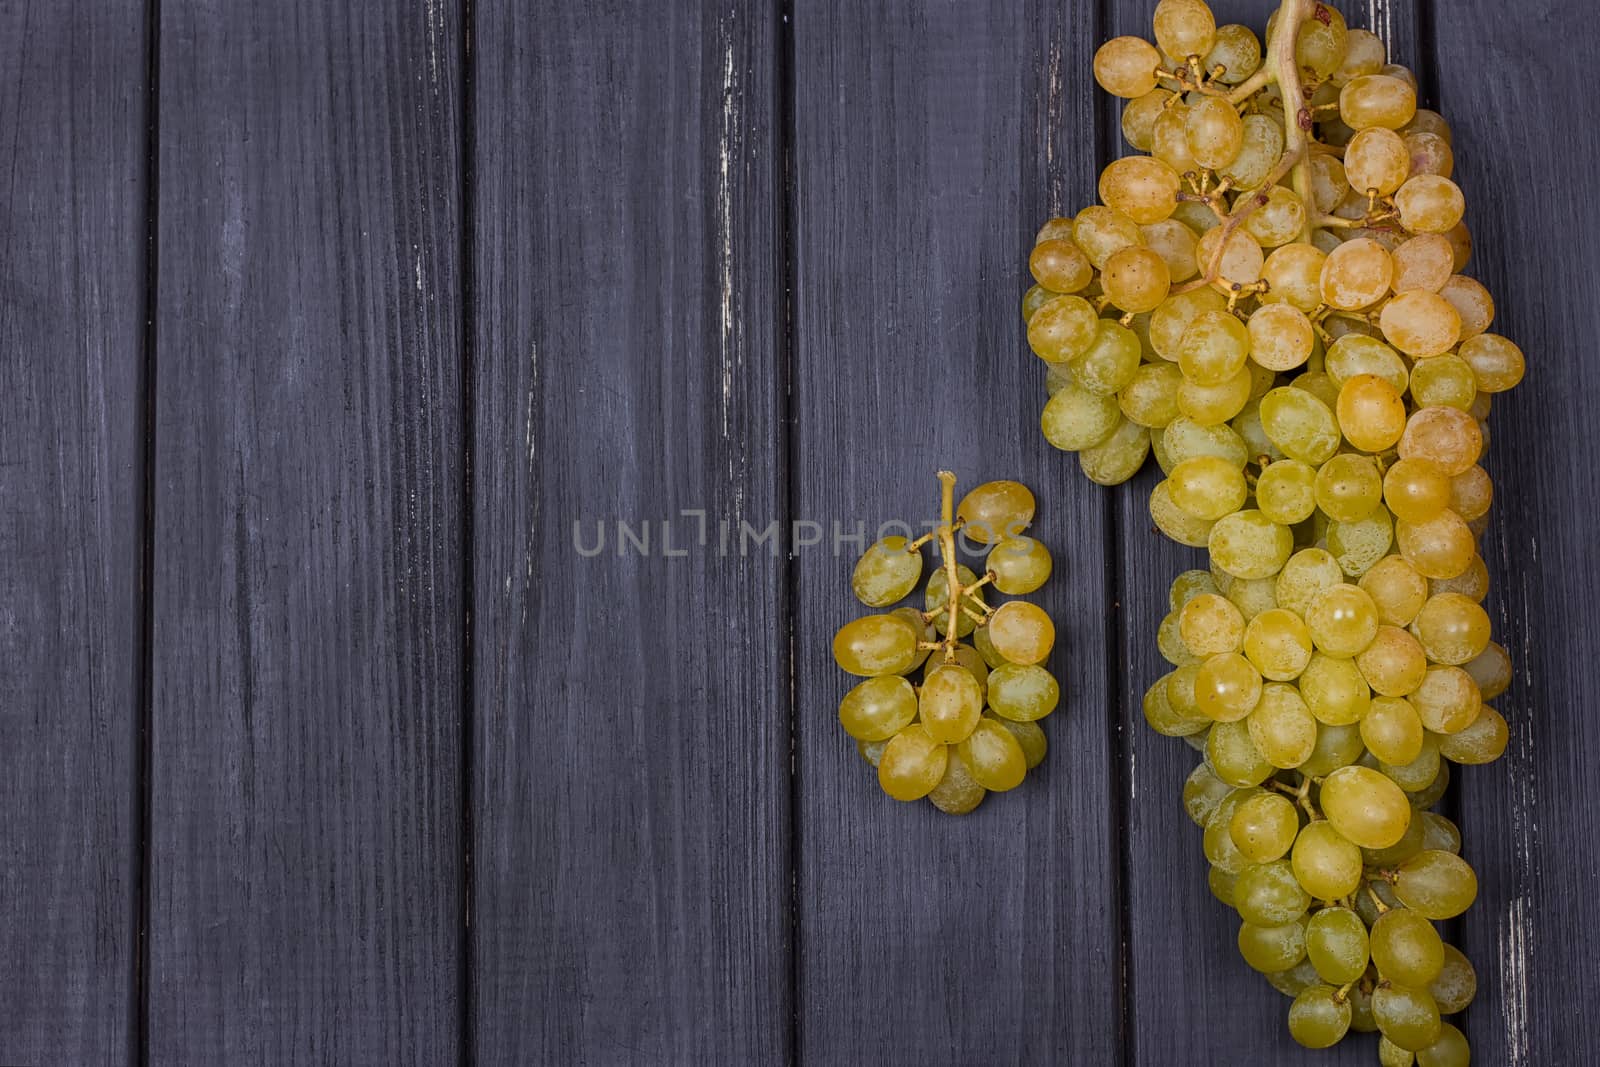 bunch of white grapes on a black wooden background. Rustic style. Place for text. copy-space